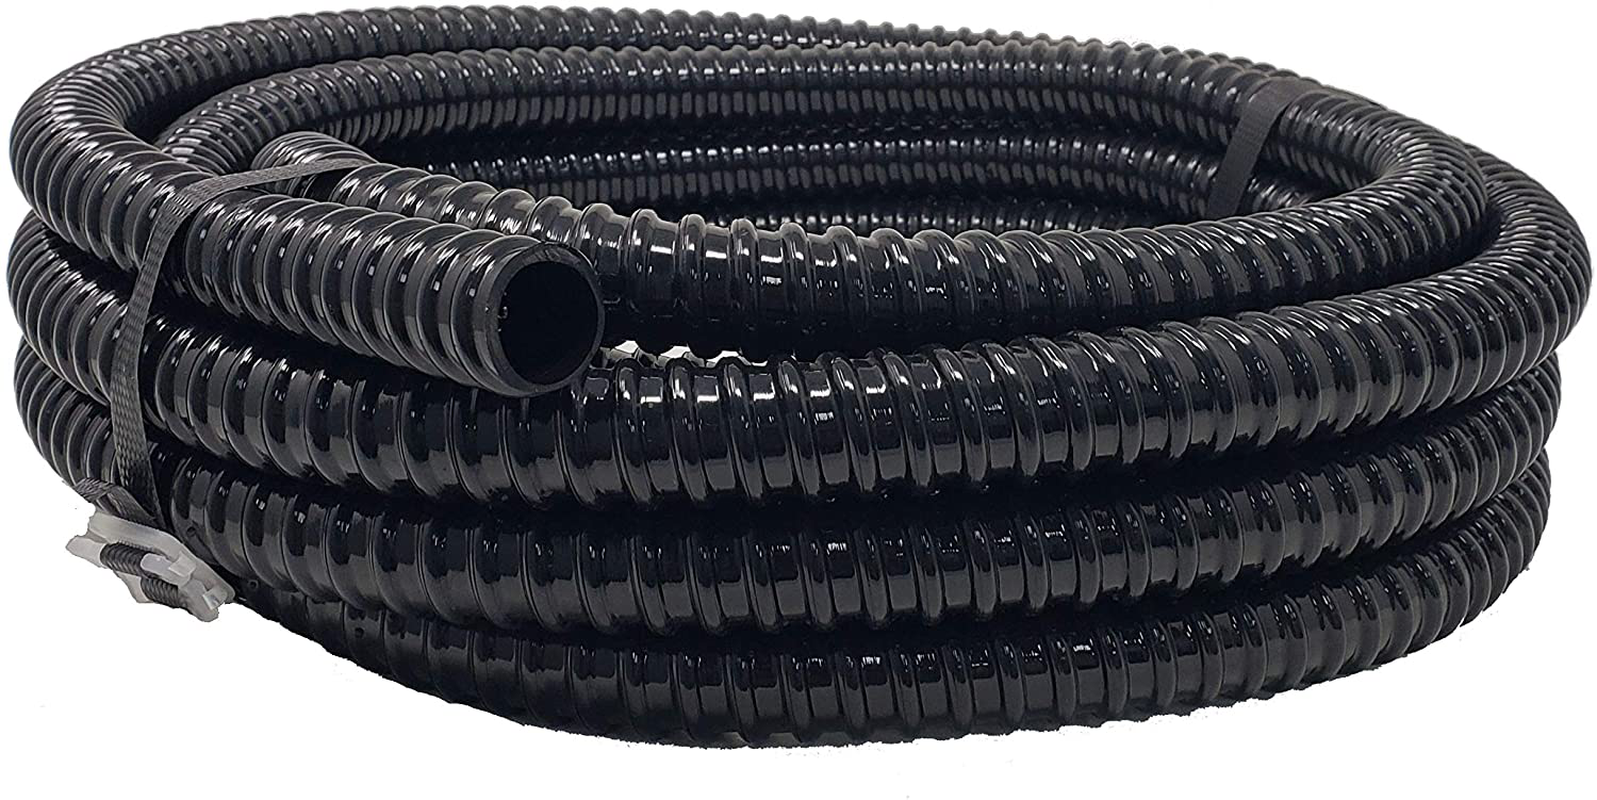 Sealproof 3/4" Dia Corrugated Pond Tubing 3/4-Inch ID, 20 FT Long, Black Kink Free Strong and Flexible Made in USA PVC Tubing Animals & Pet Supplies > Pet Supplies > Fish Supplies > Aquarium & Pond Tubing Sealproof   